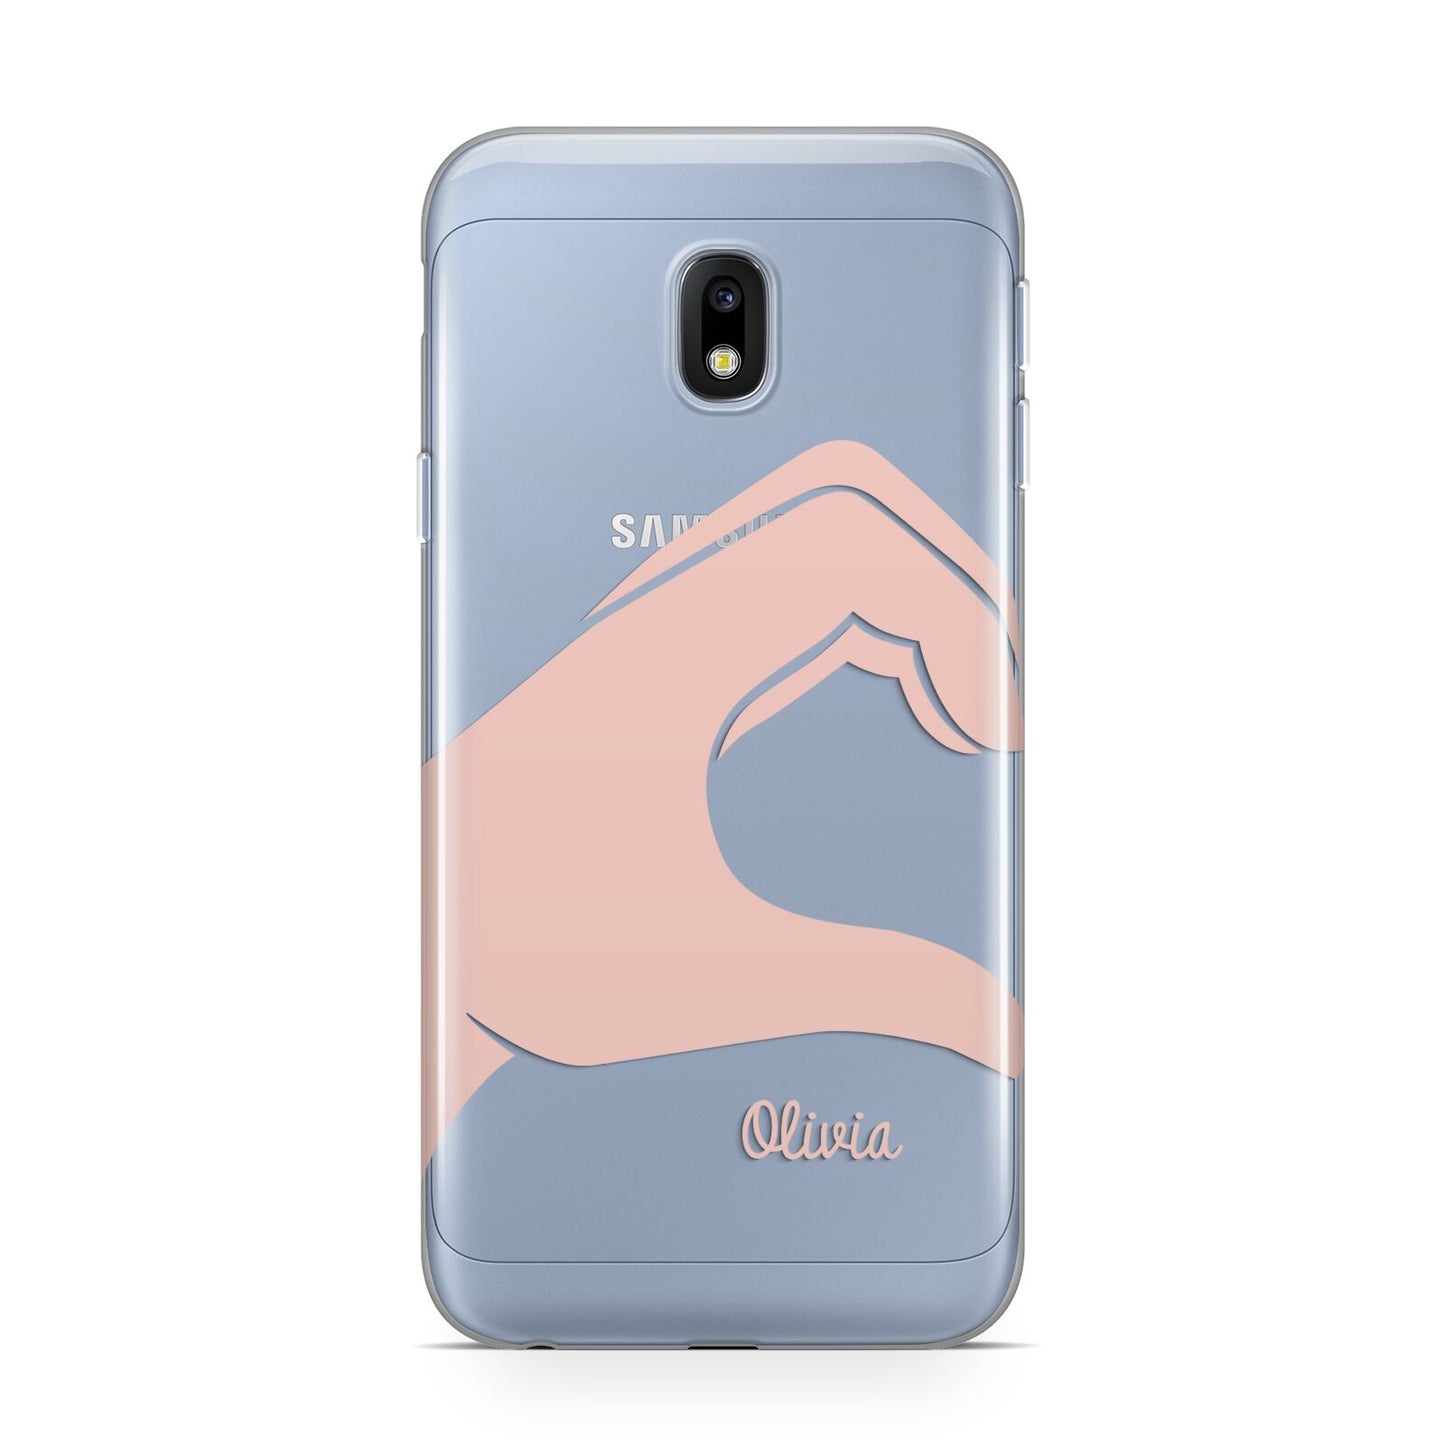 Left Hand in Half Heart with Name Samsung Galaxy J3 2017 Case